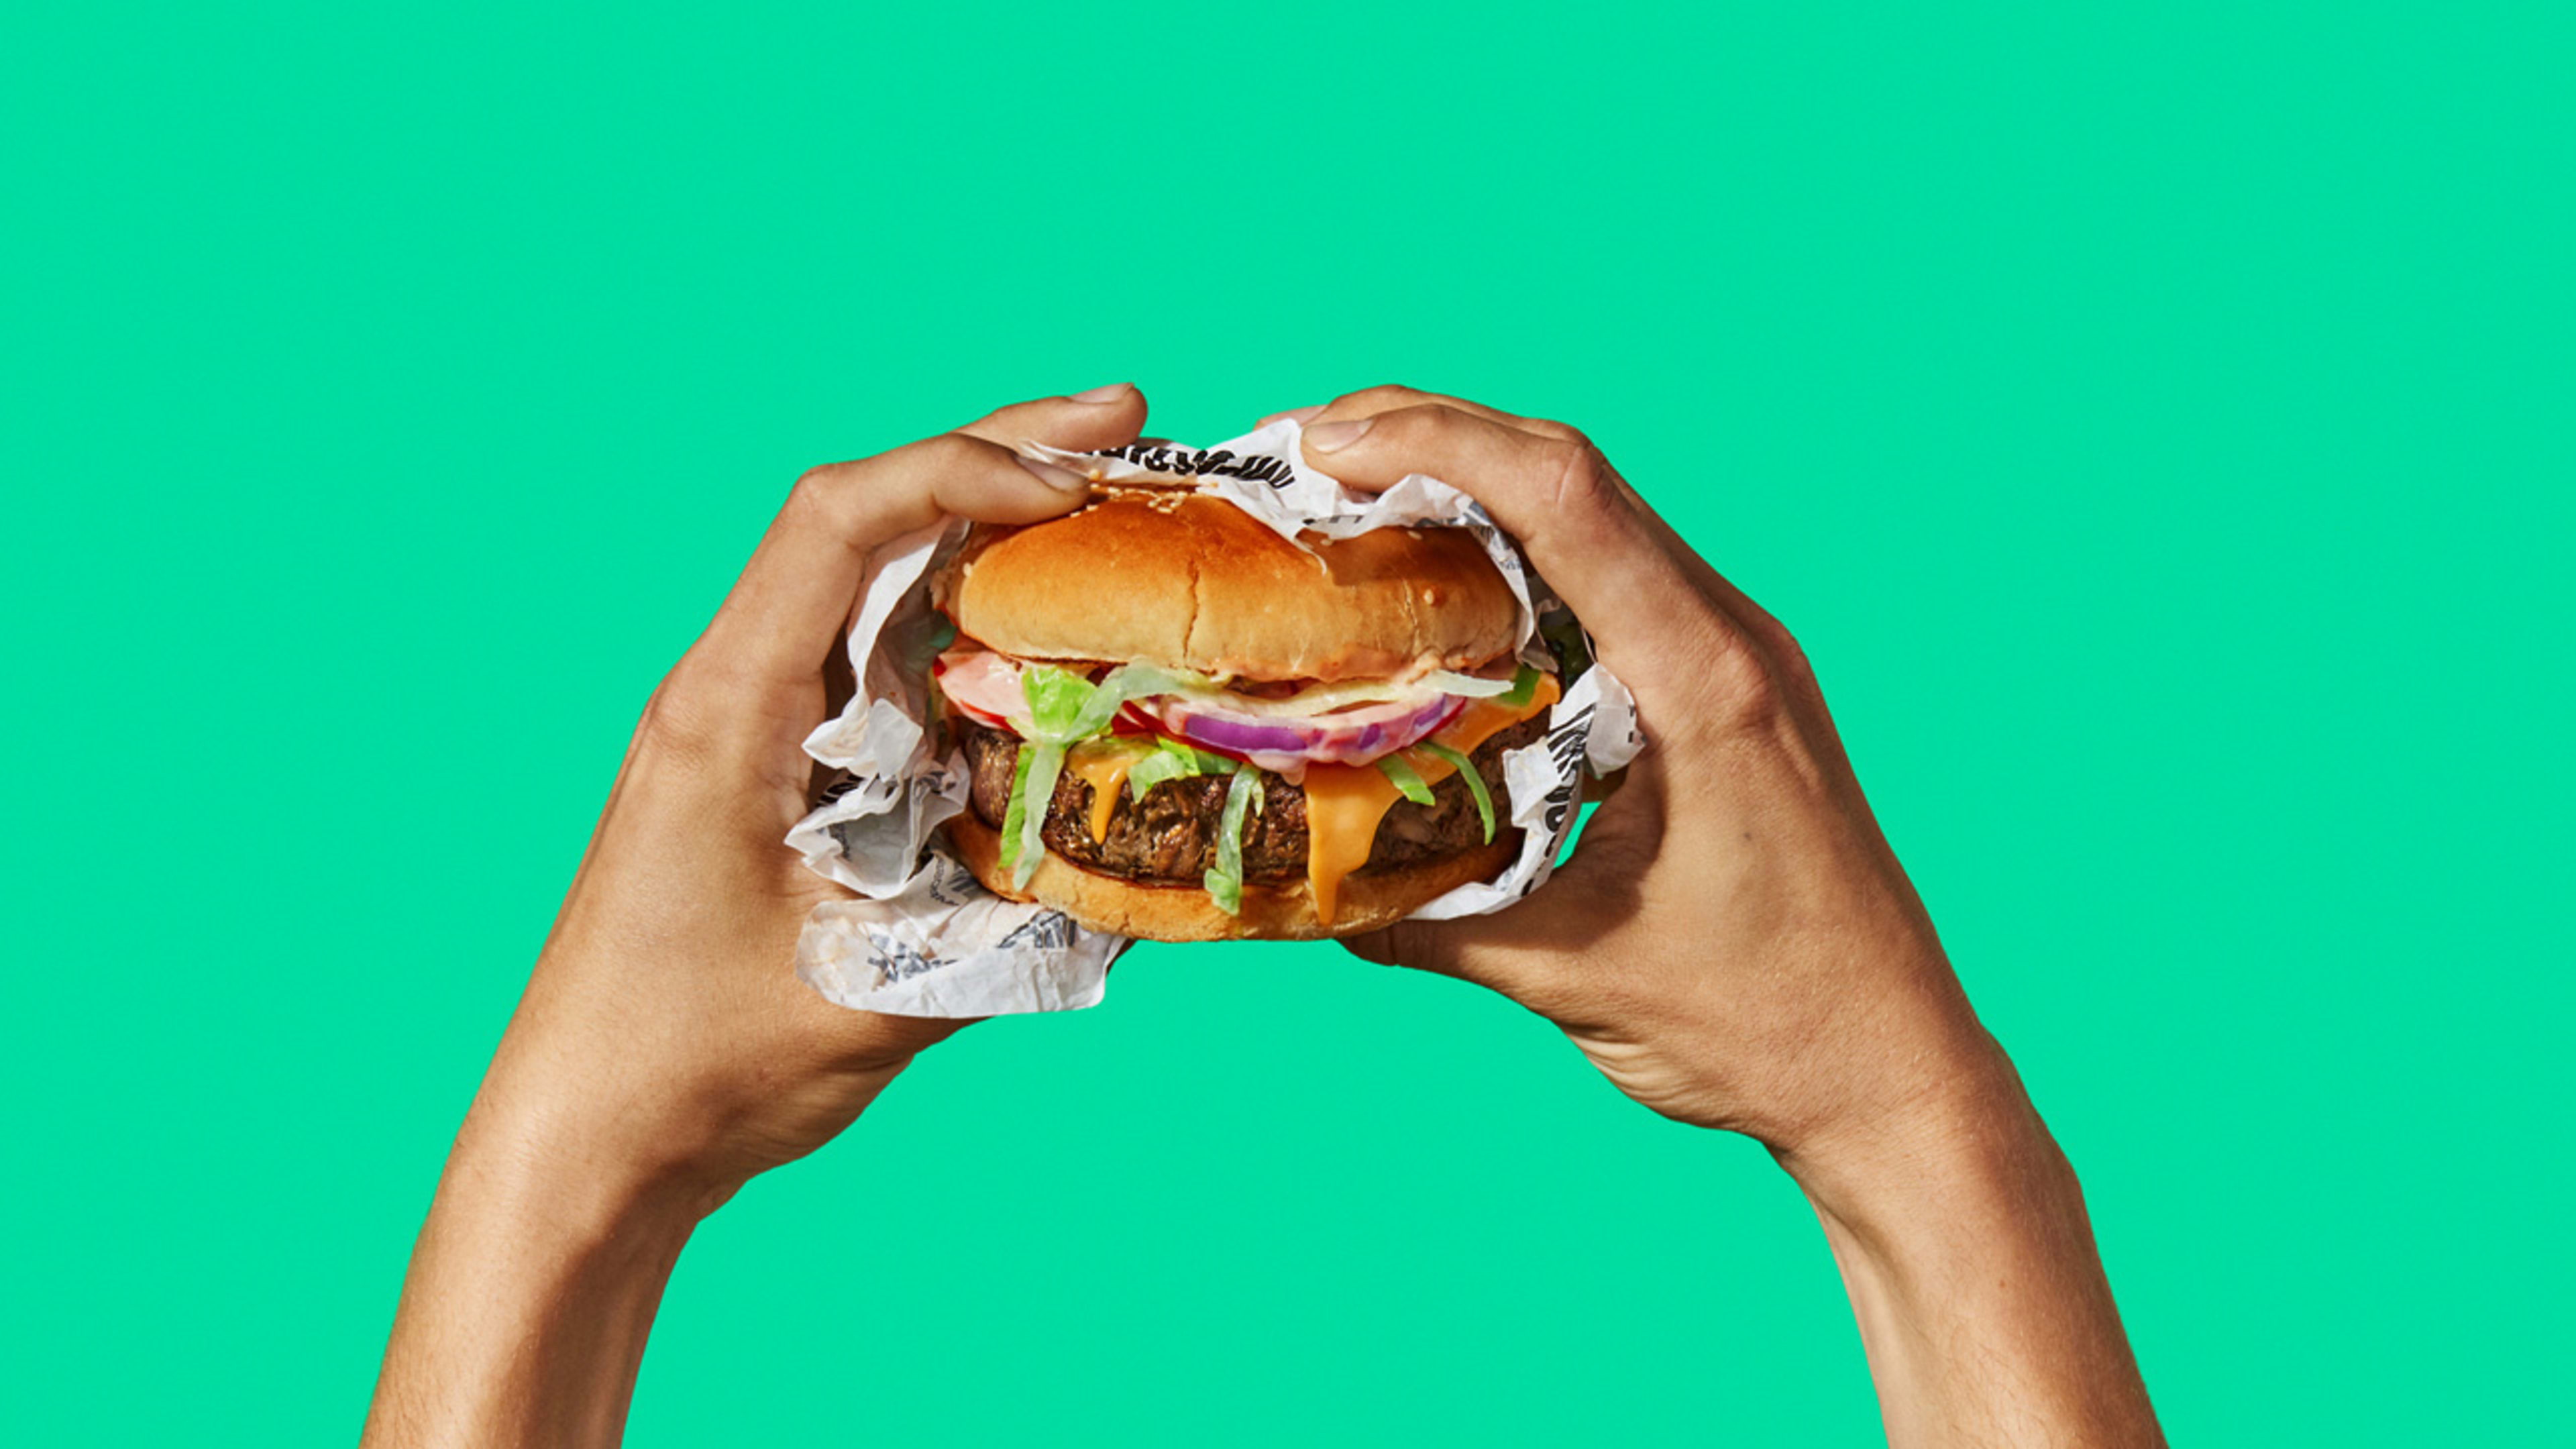 Impossible Foods is making 500,000 pounds of fake meat a month